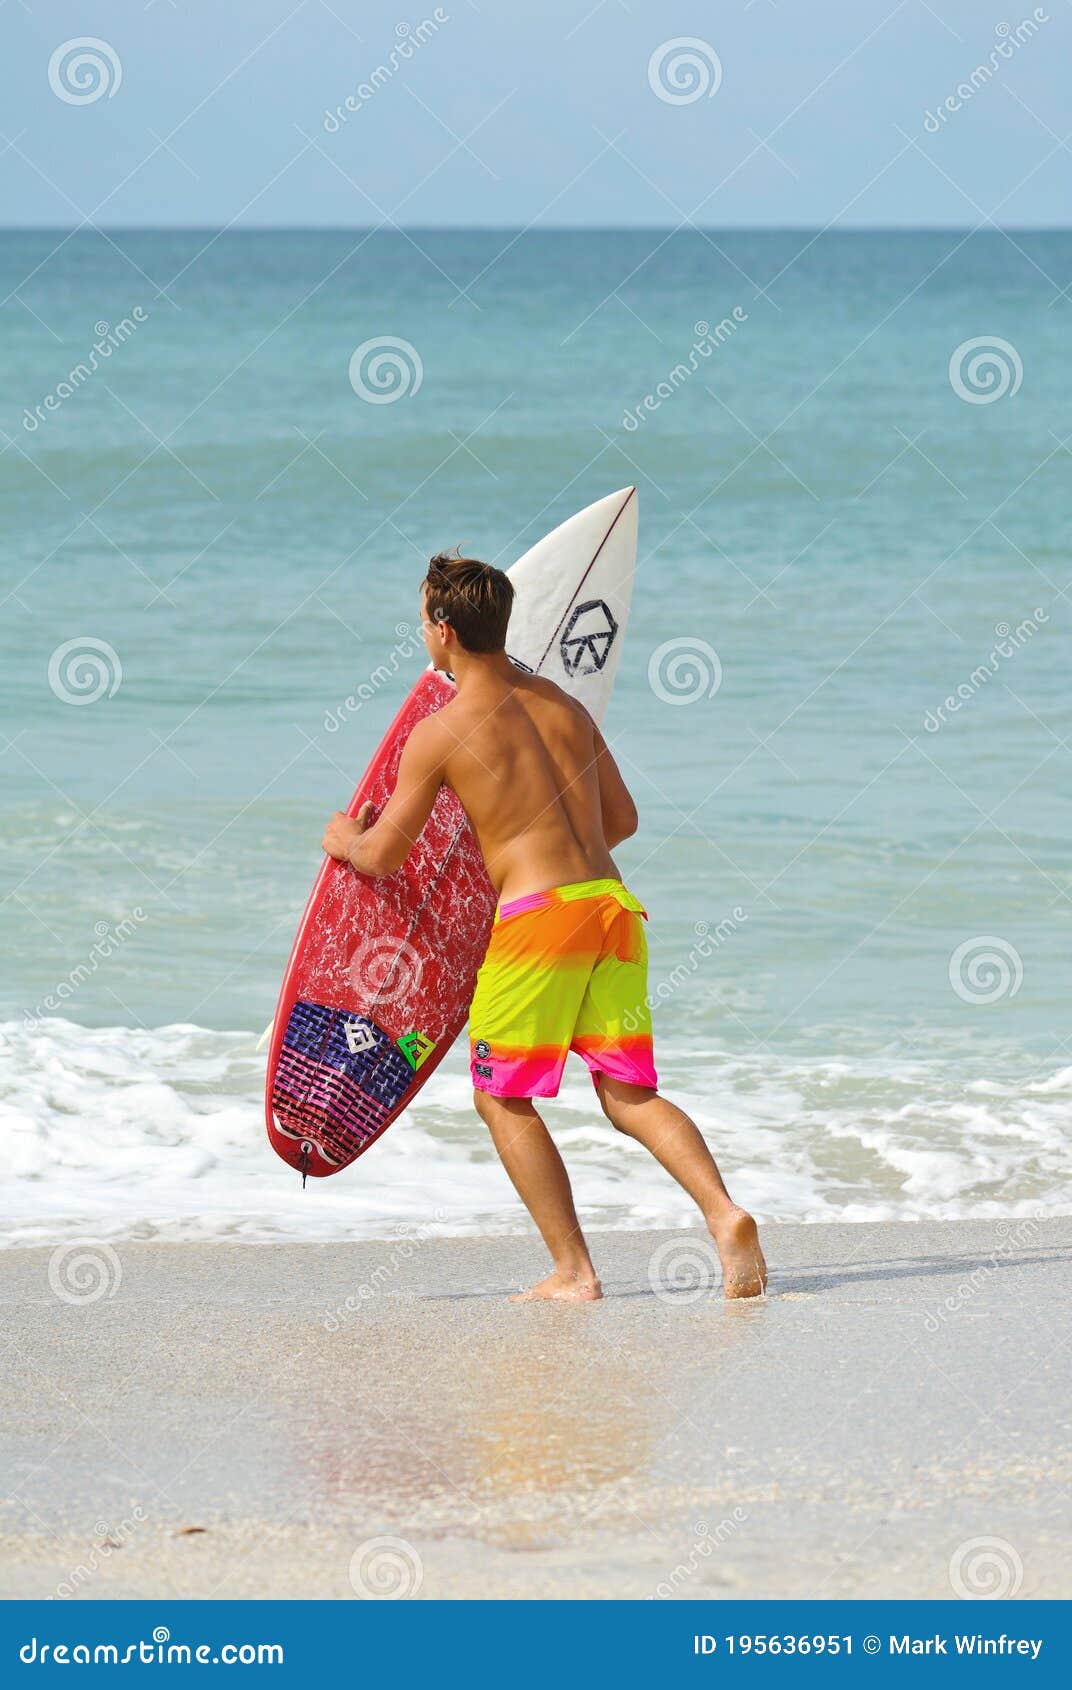 Surfer Carry Surfboard into the Ocean Editorial Photo - Image of ocean ...